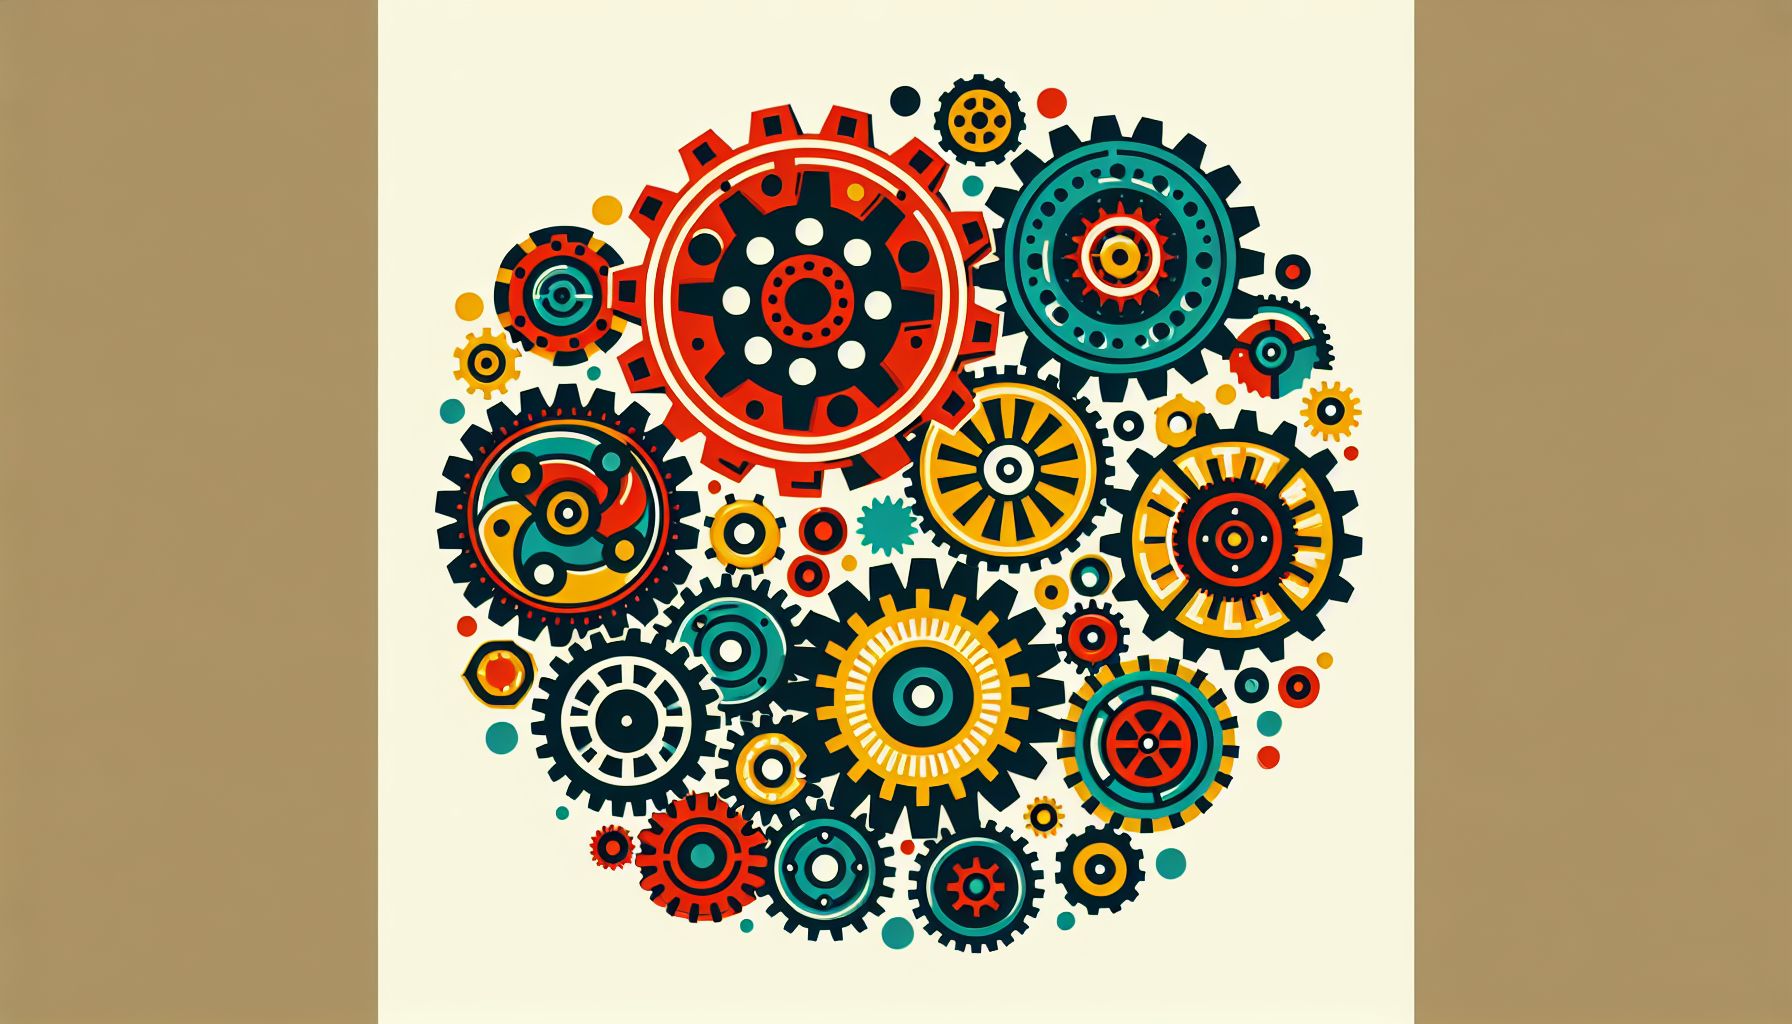 Gears in flat illustration style and white background, red #f47574, green #88c7a8, yellow #fcc44b, and blue #645bc8 colors.